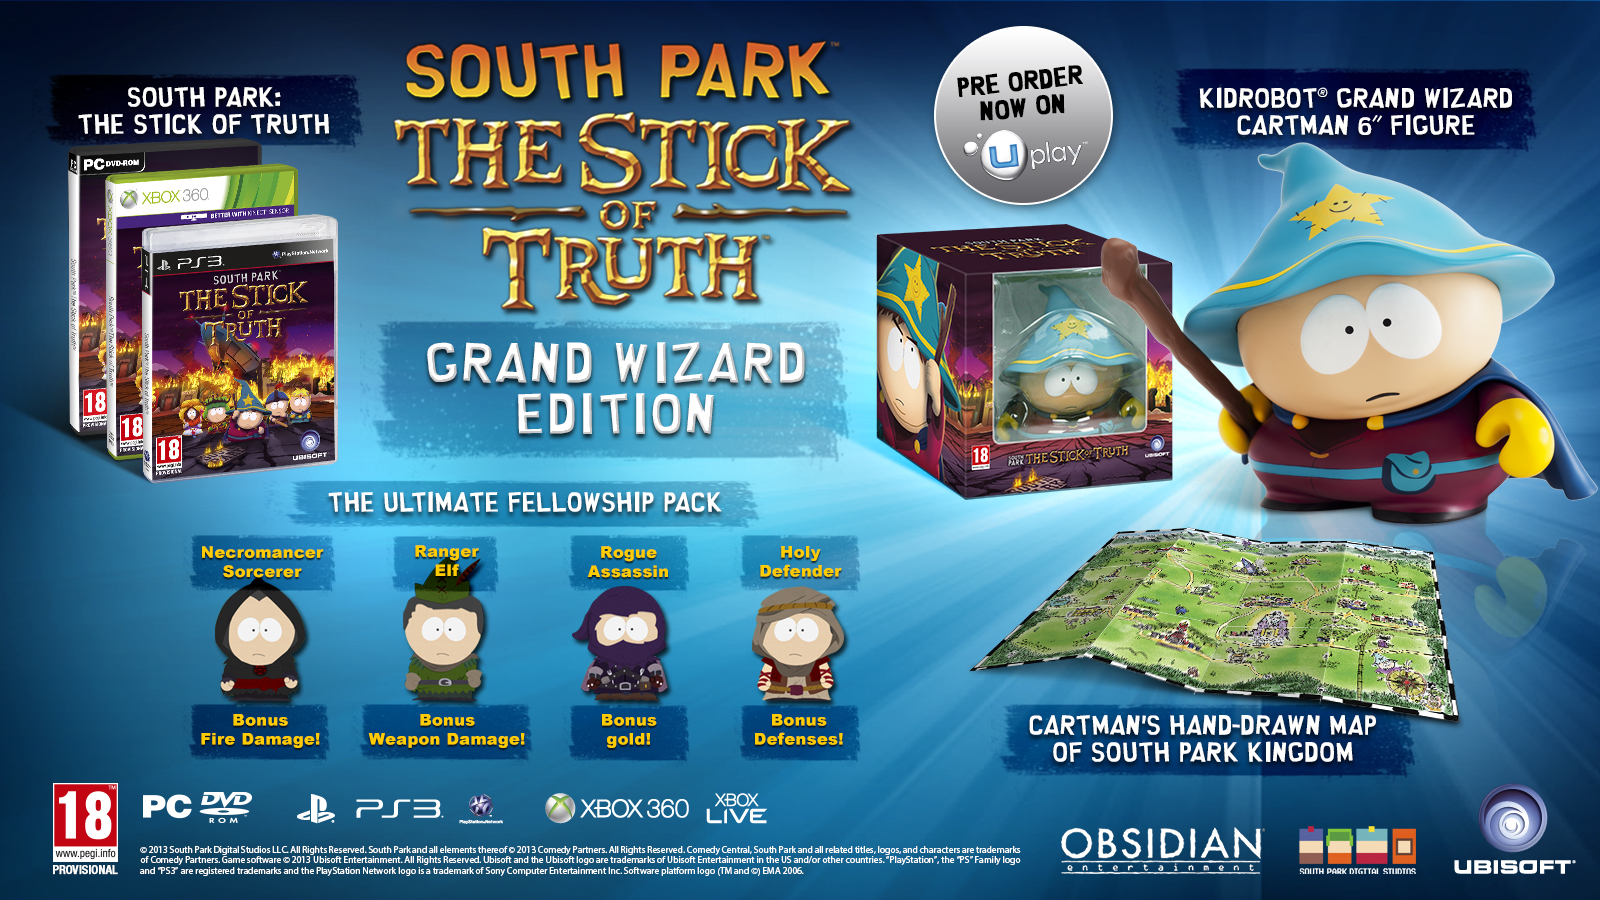 South Park Stick Of Truth Gamer - HD Wallpaper 